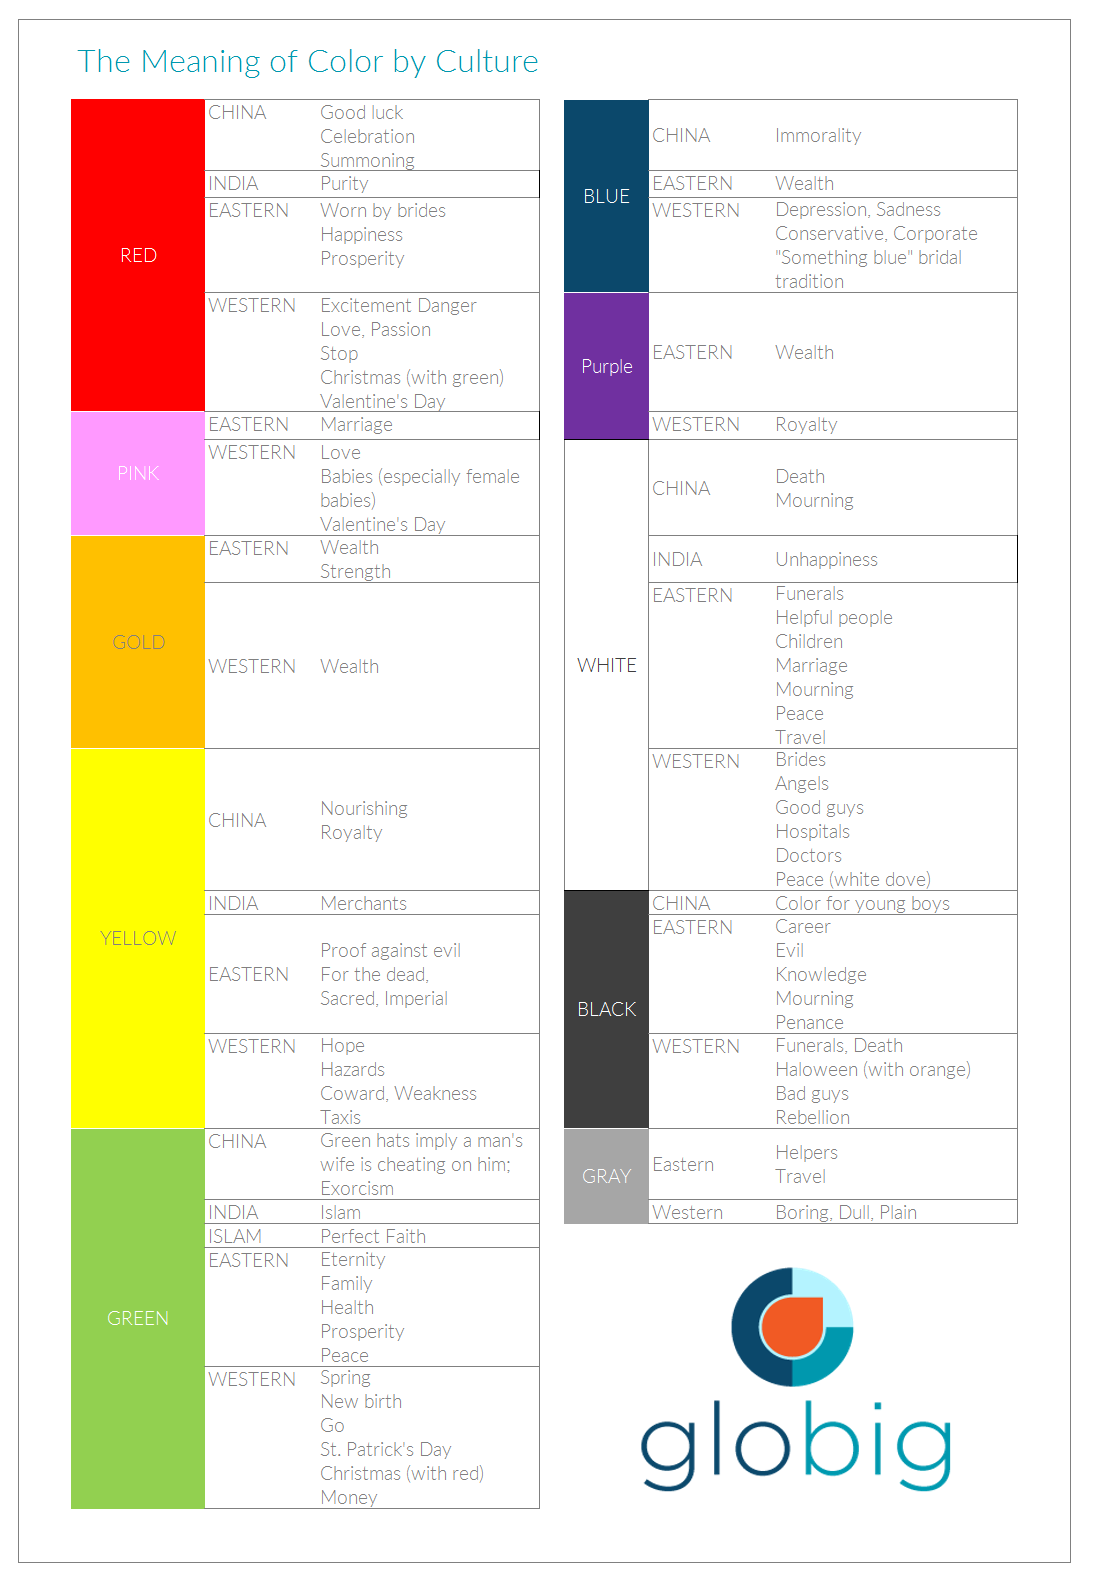 Chart showing the meaning of color in different cultures